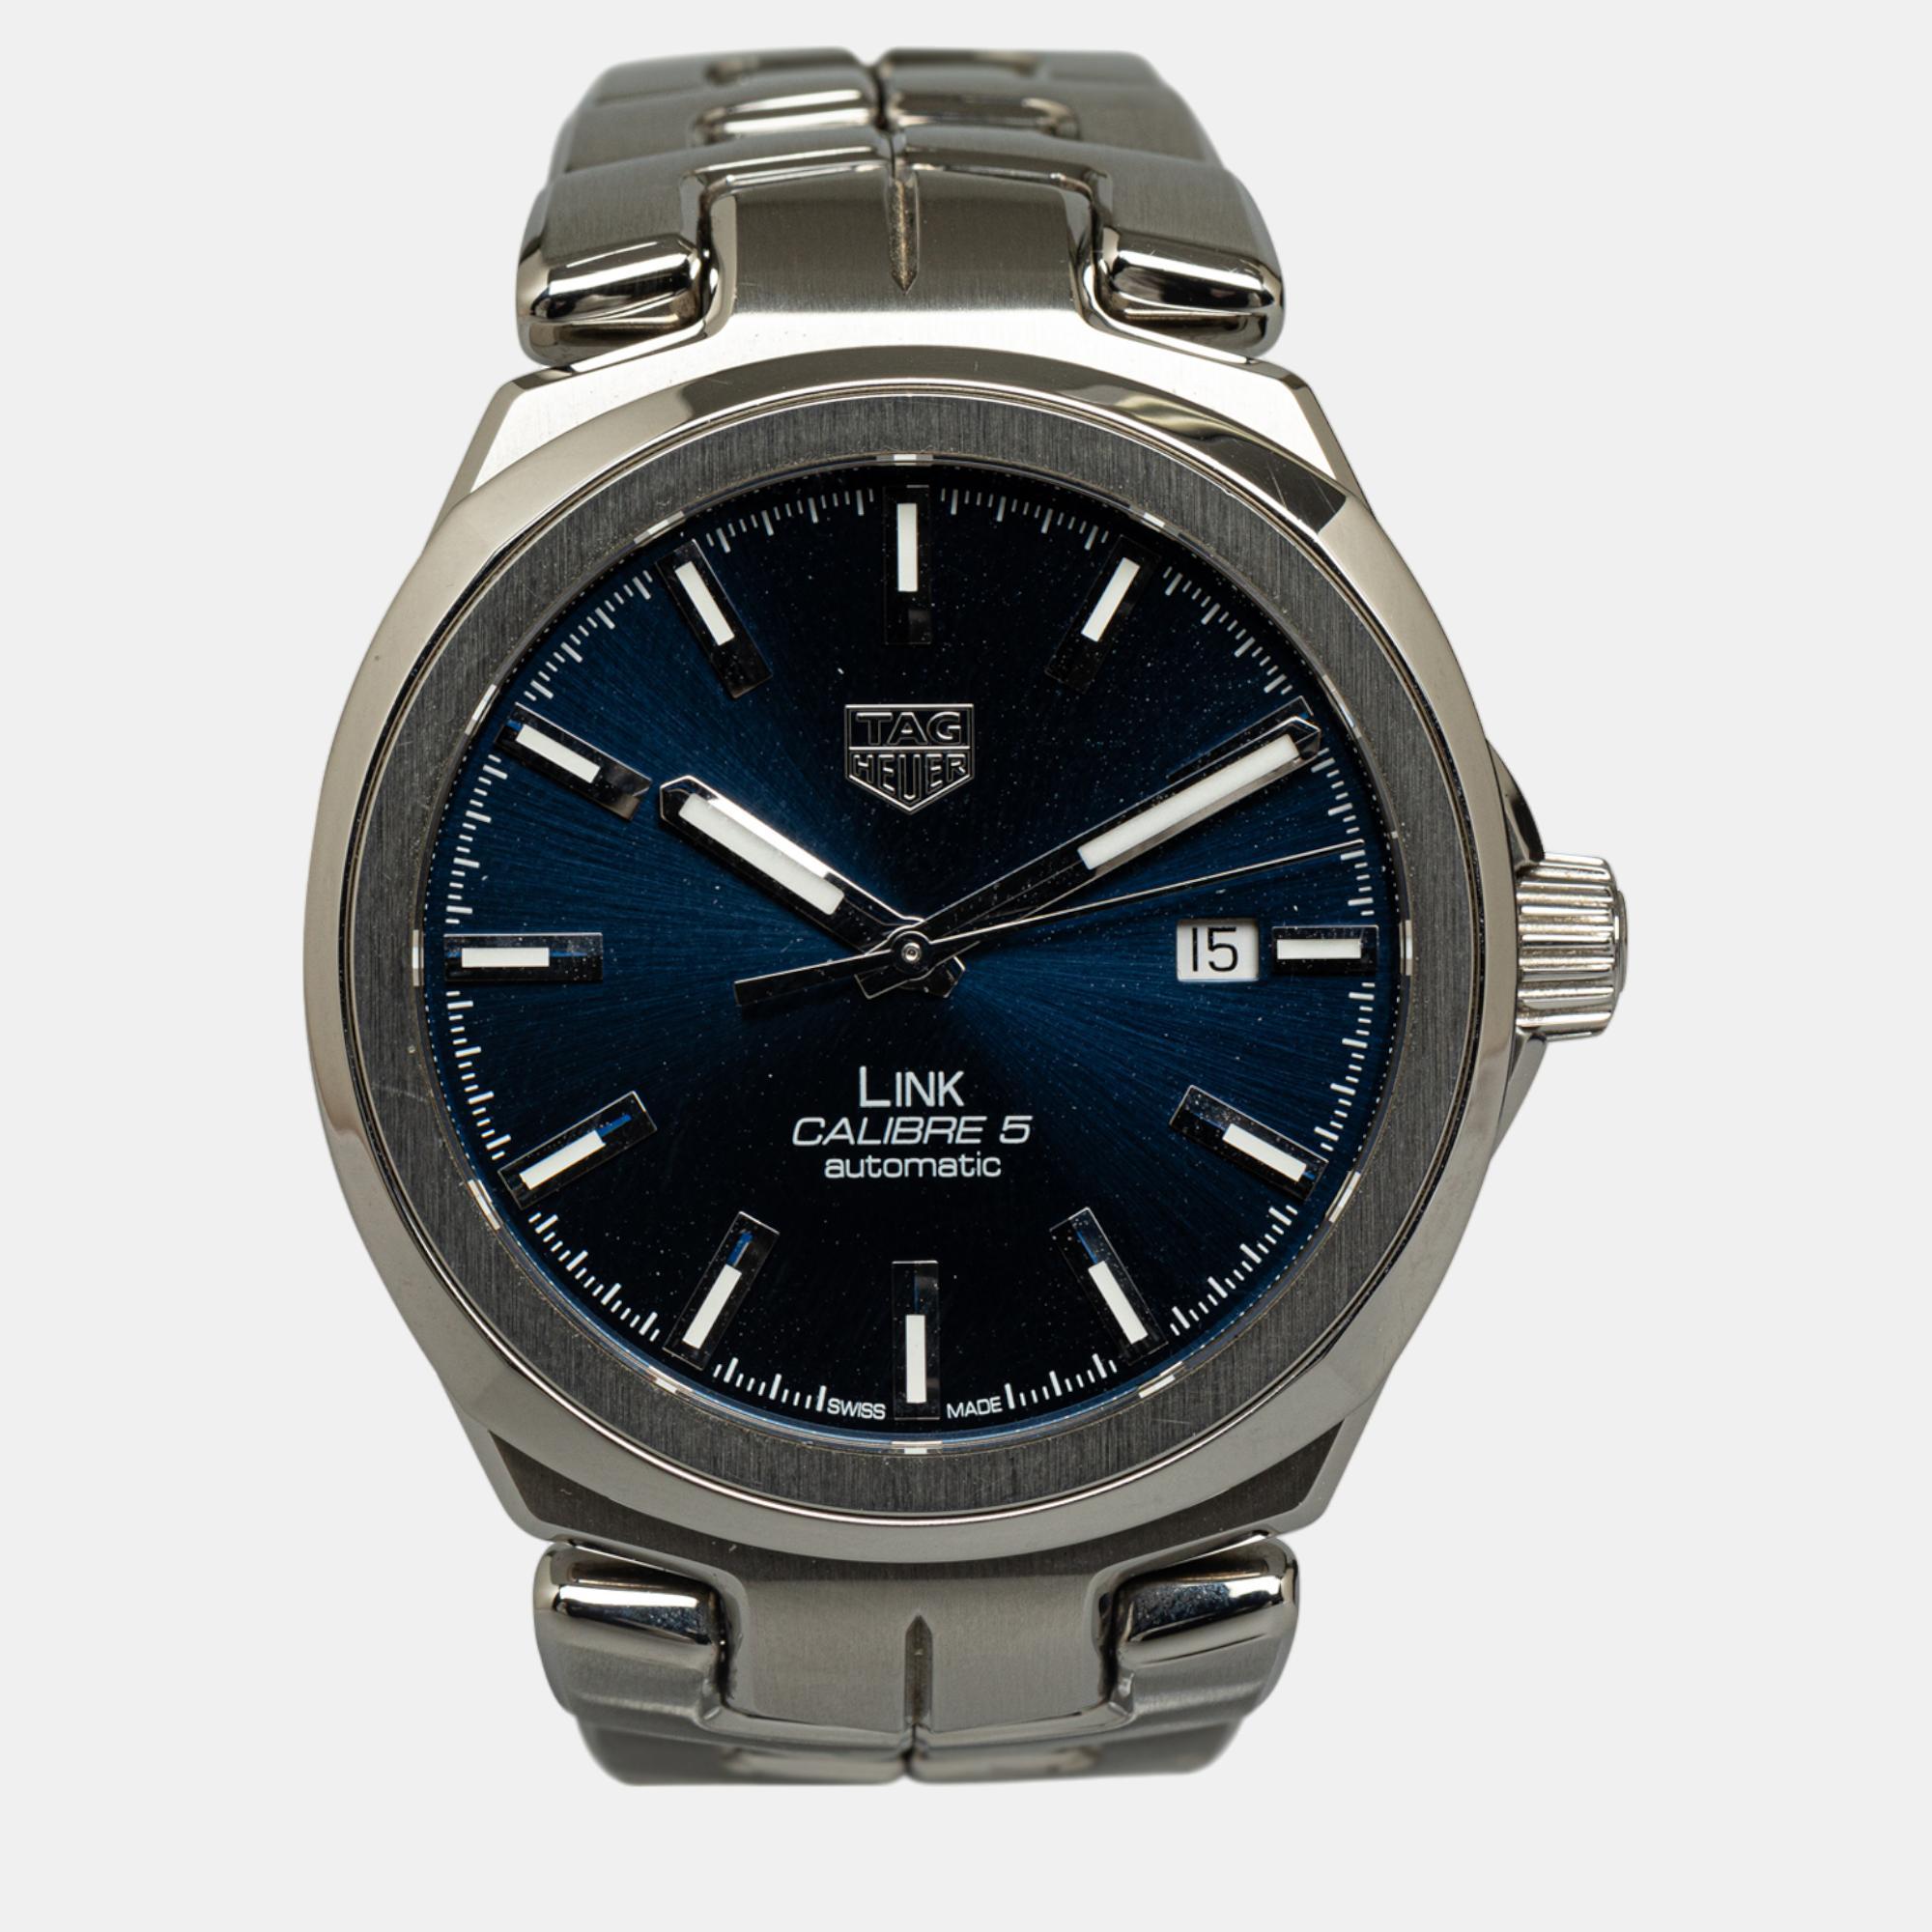 

Tag Heuer Automatic Stainless Steel Link Calibre 5 Watch, Blue